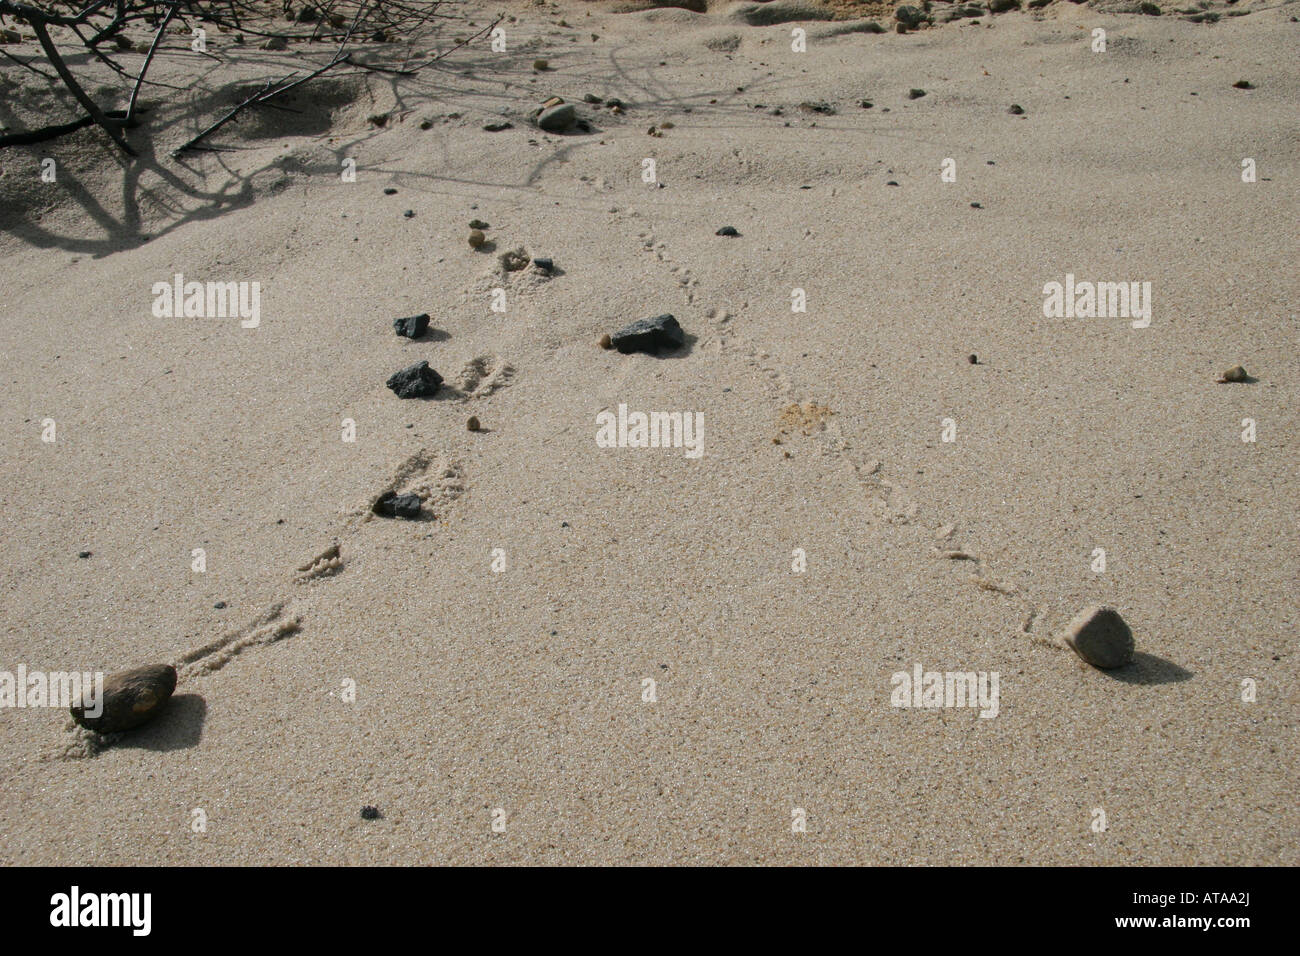 Small rocks tumble down the sides of an eroding cliff, leaving carving their path in the sandy dune. Stock Photo